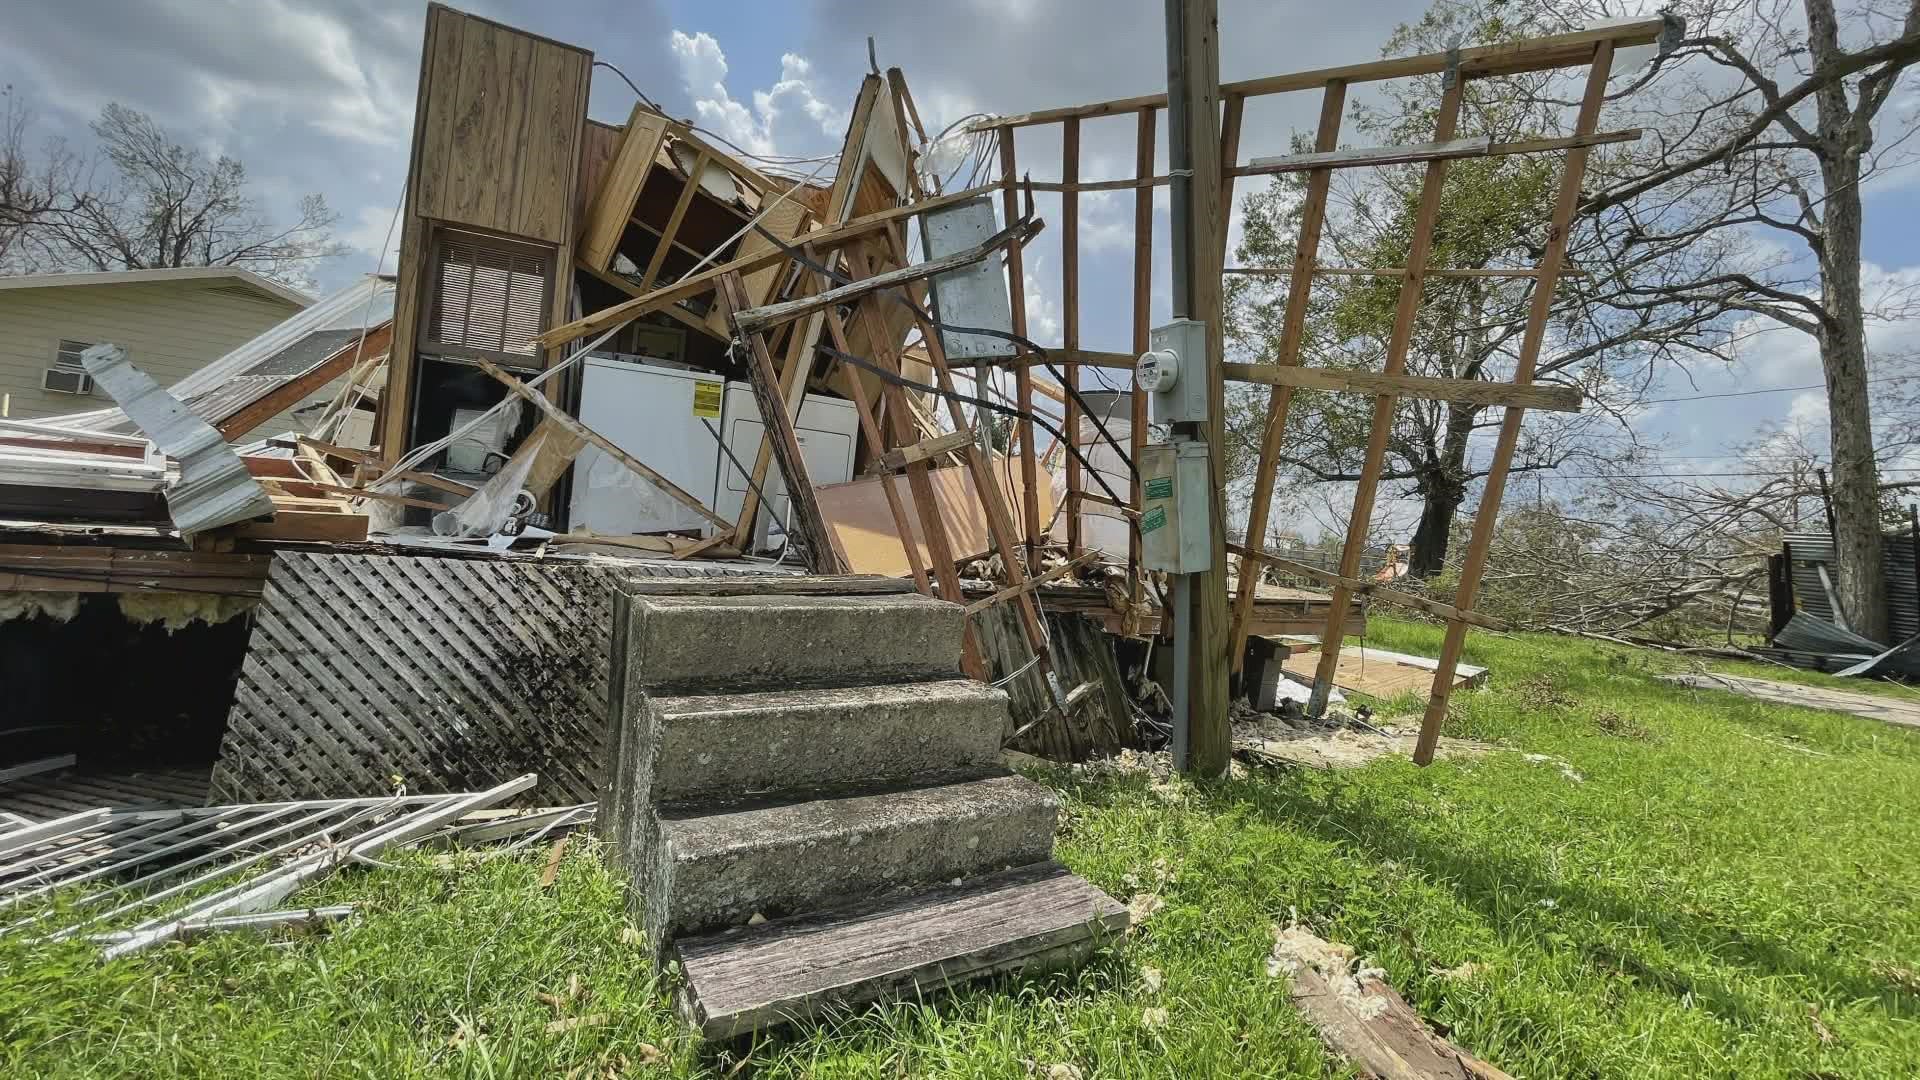 Terrebonne residents are thankful for the help they have received after the hurricane but emotions are still flowing as the damage is heartbreaking.